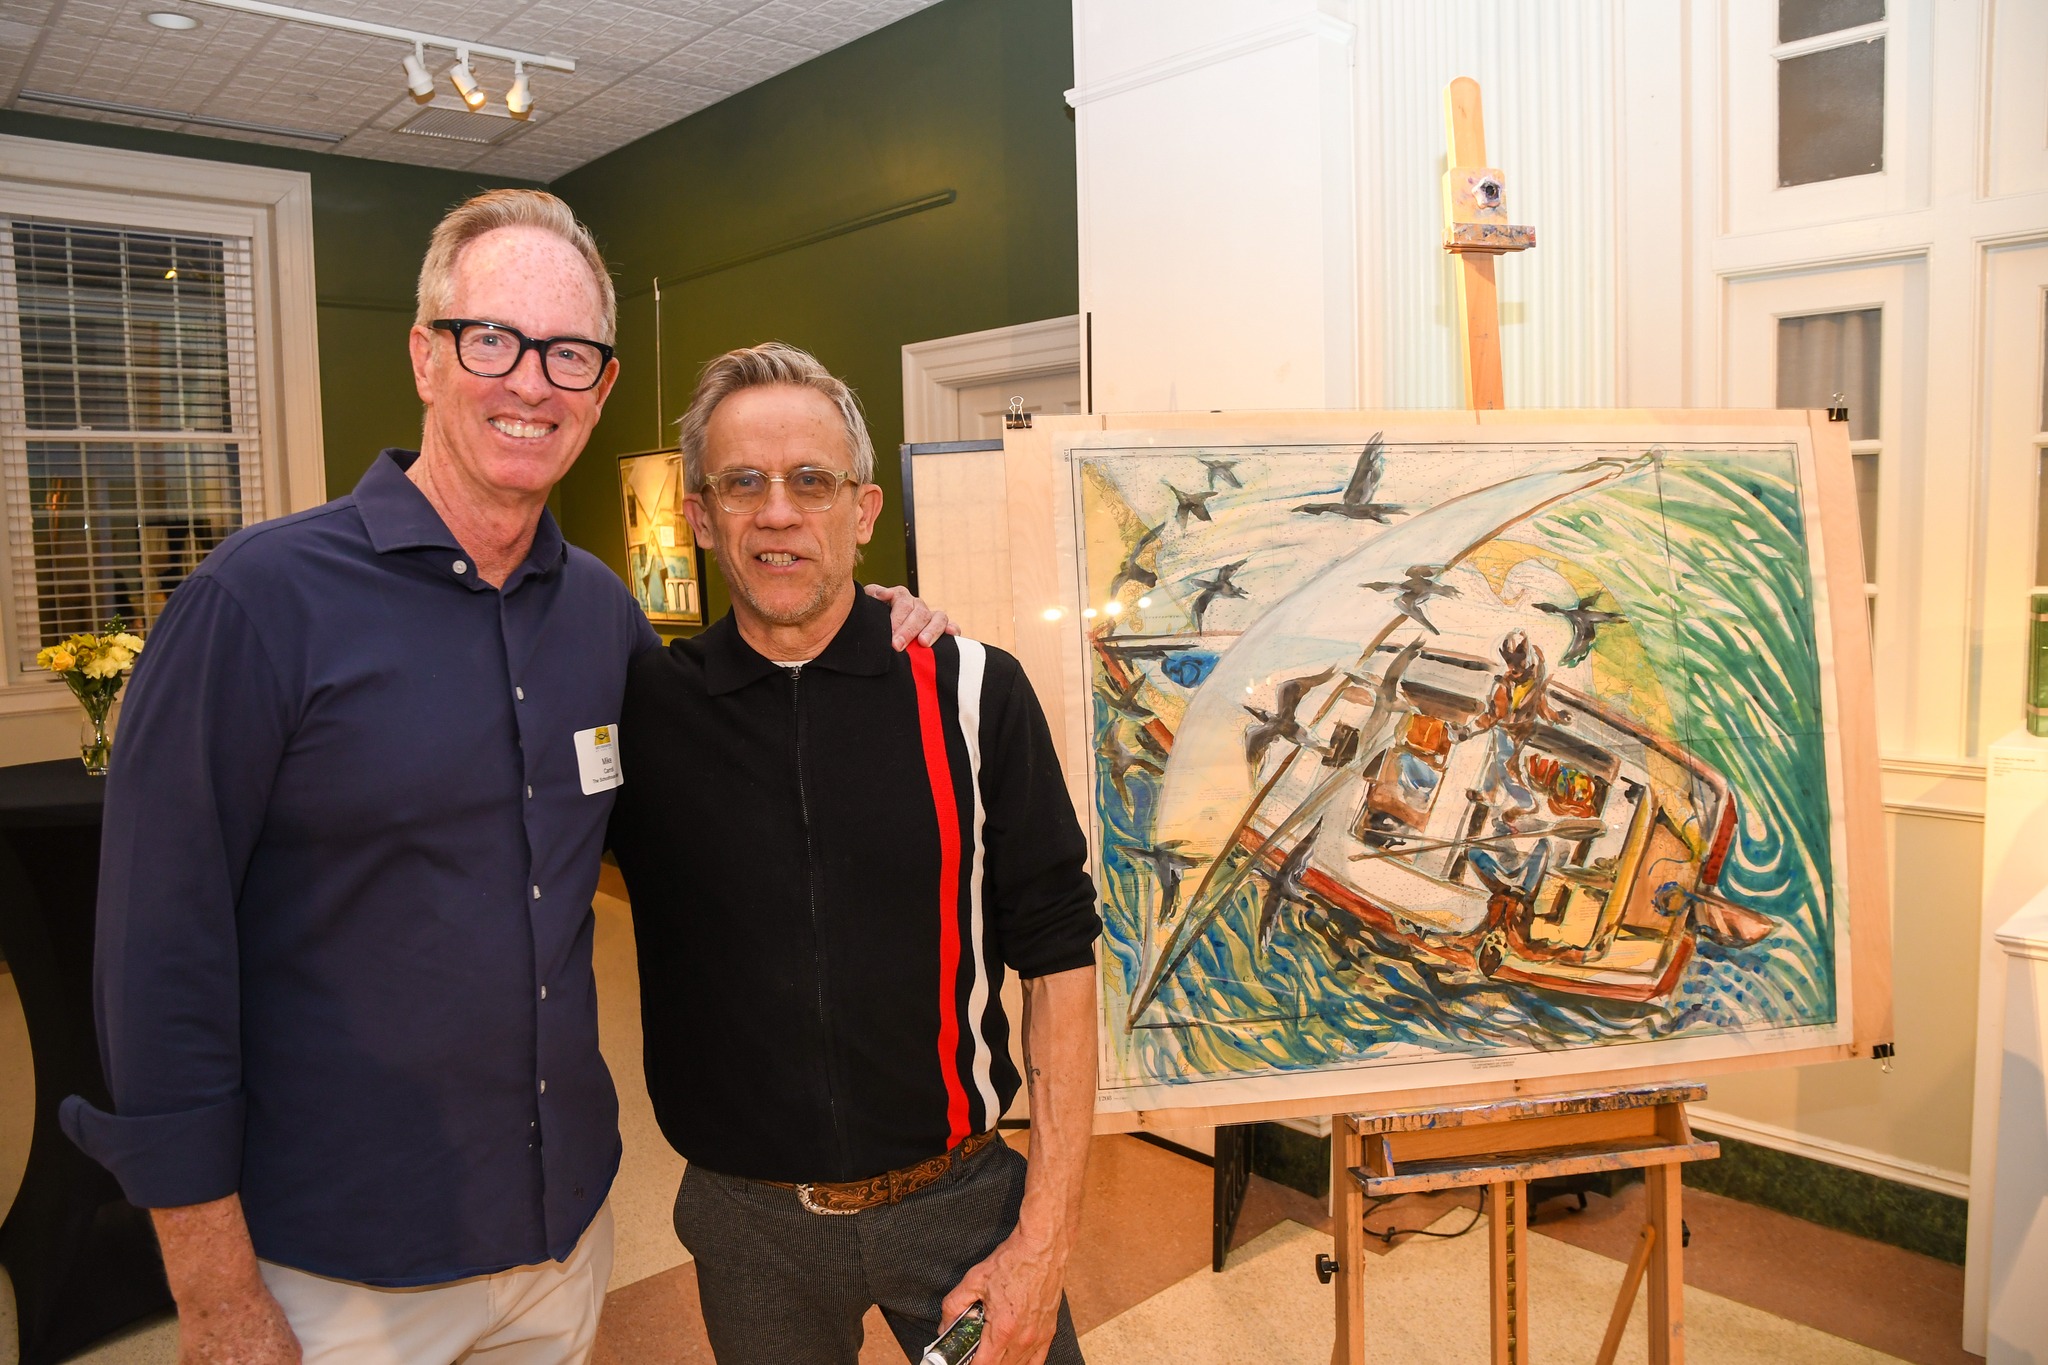 Mike Carroll and Mark Adams next to Mark's painting, Cormorants on the Wind/Cape Cod Bay.